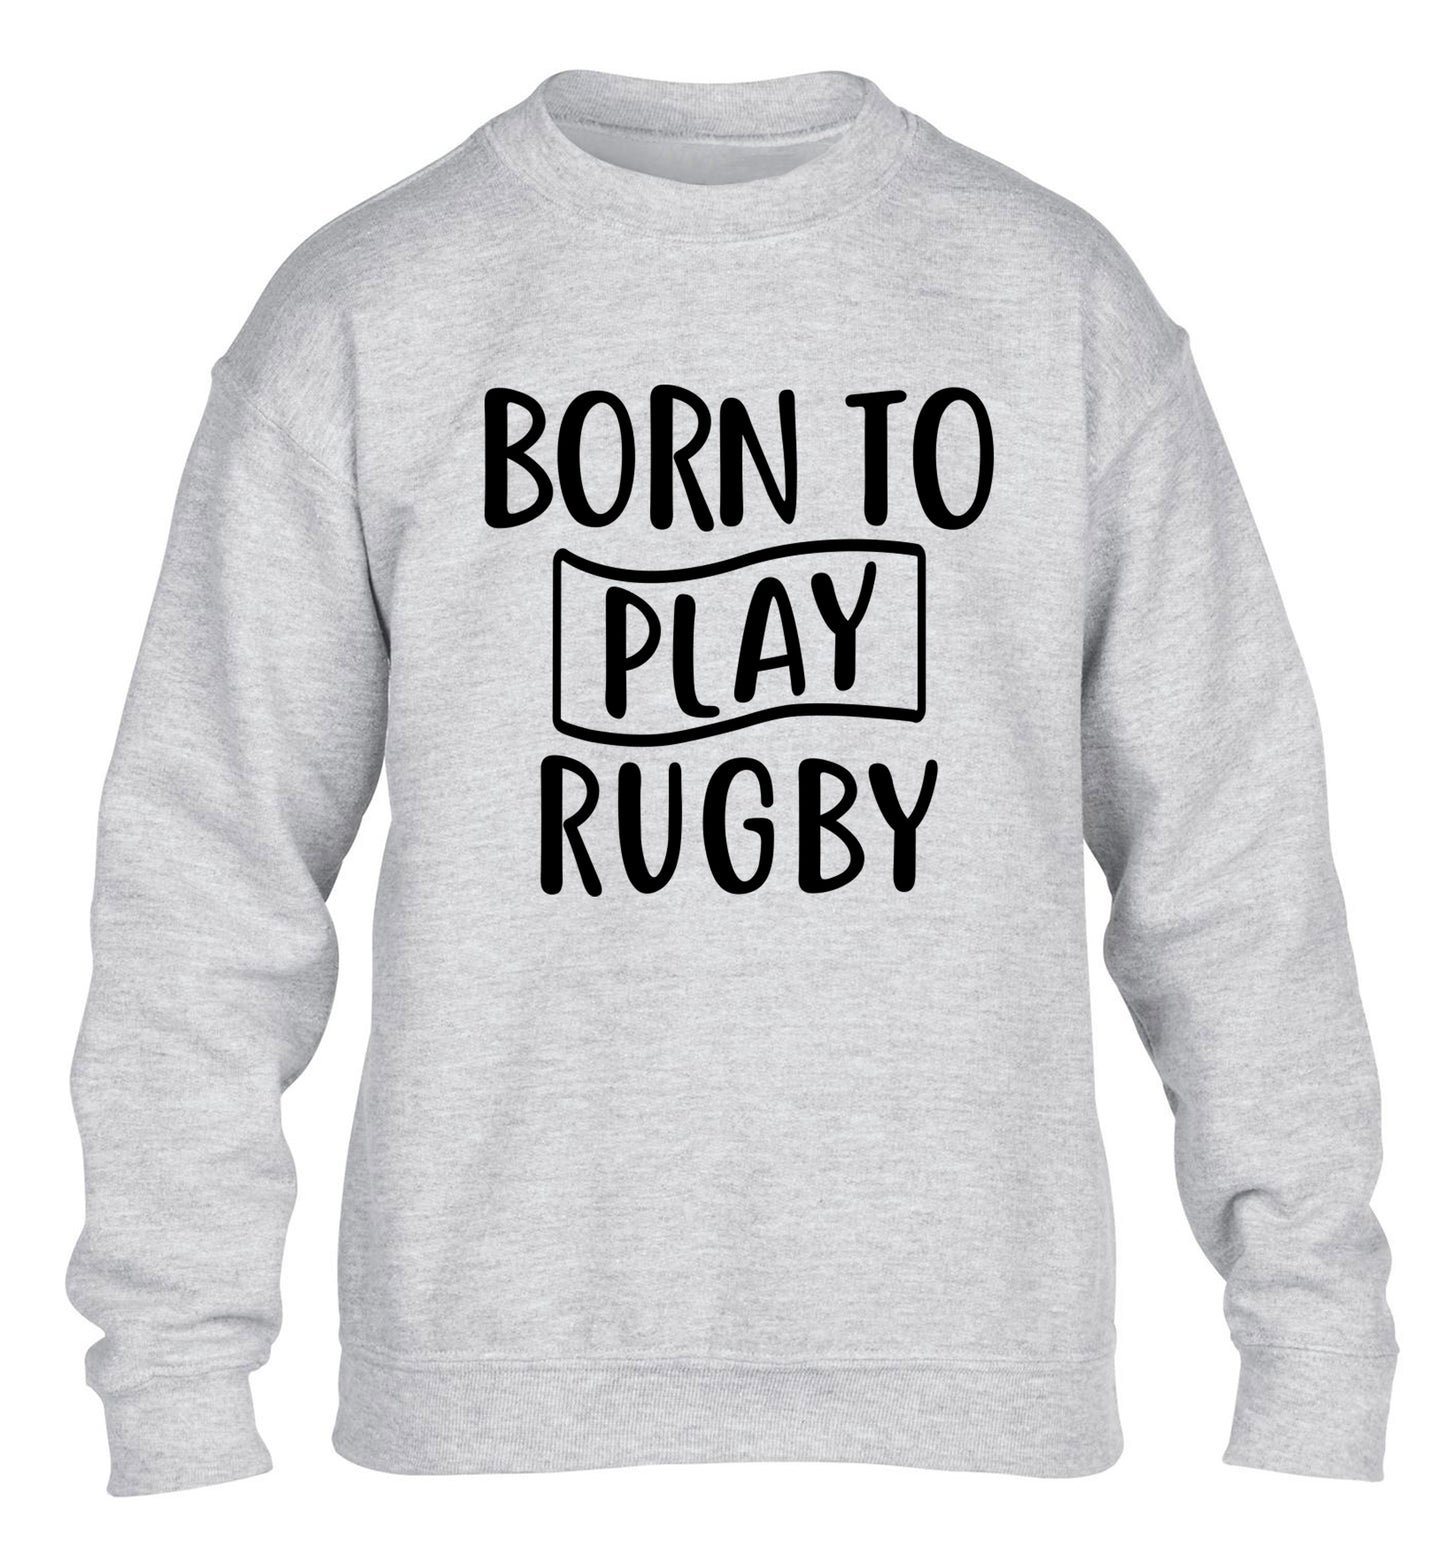 Born to play rugby children's grey sweater 12-13 Years